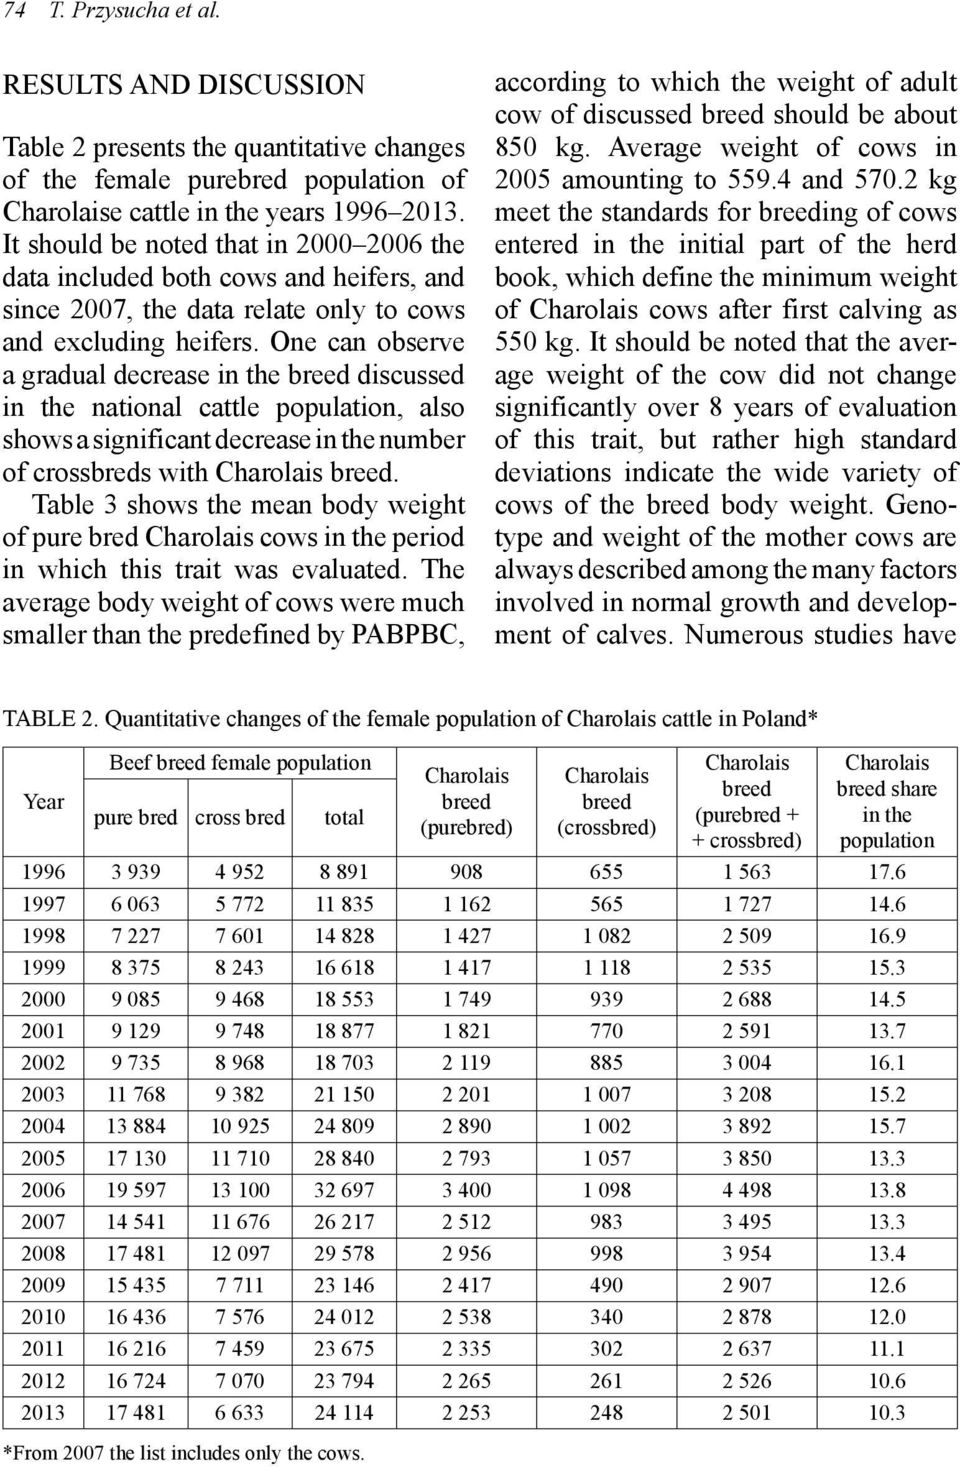 One can observe a gradual decrease in the breed discussed in the national cattle population, also shows a significant decrease in the number of crossbreds with Charolais breed.